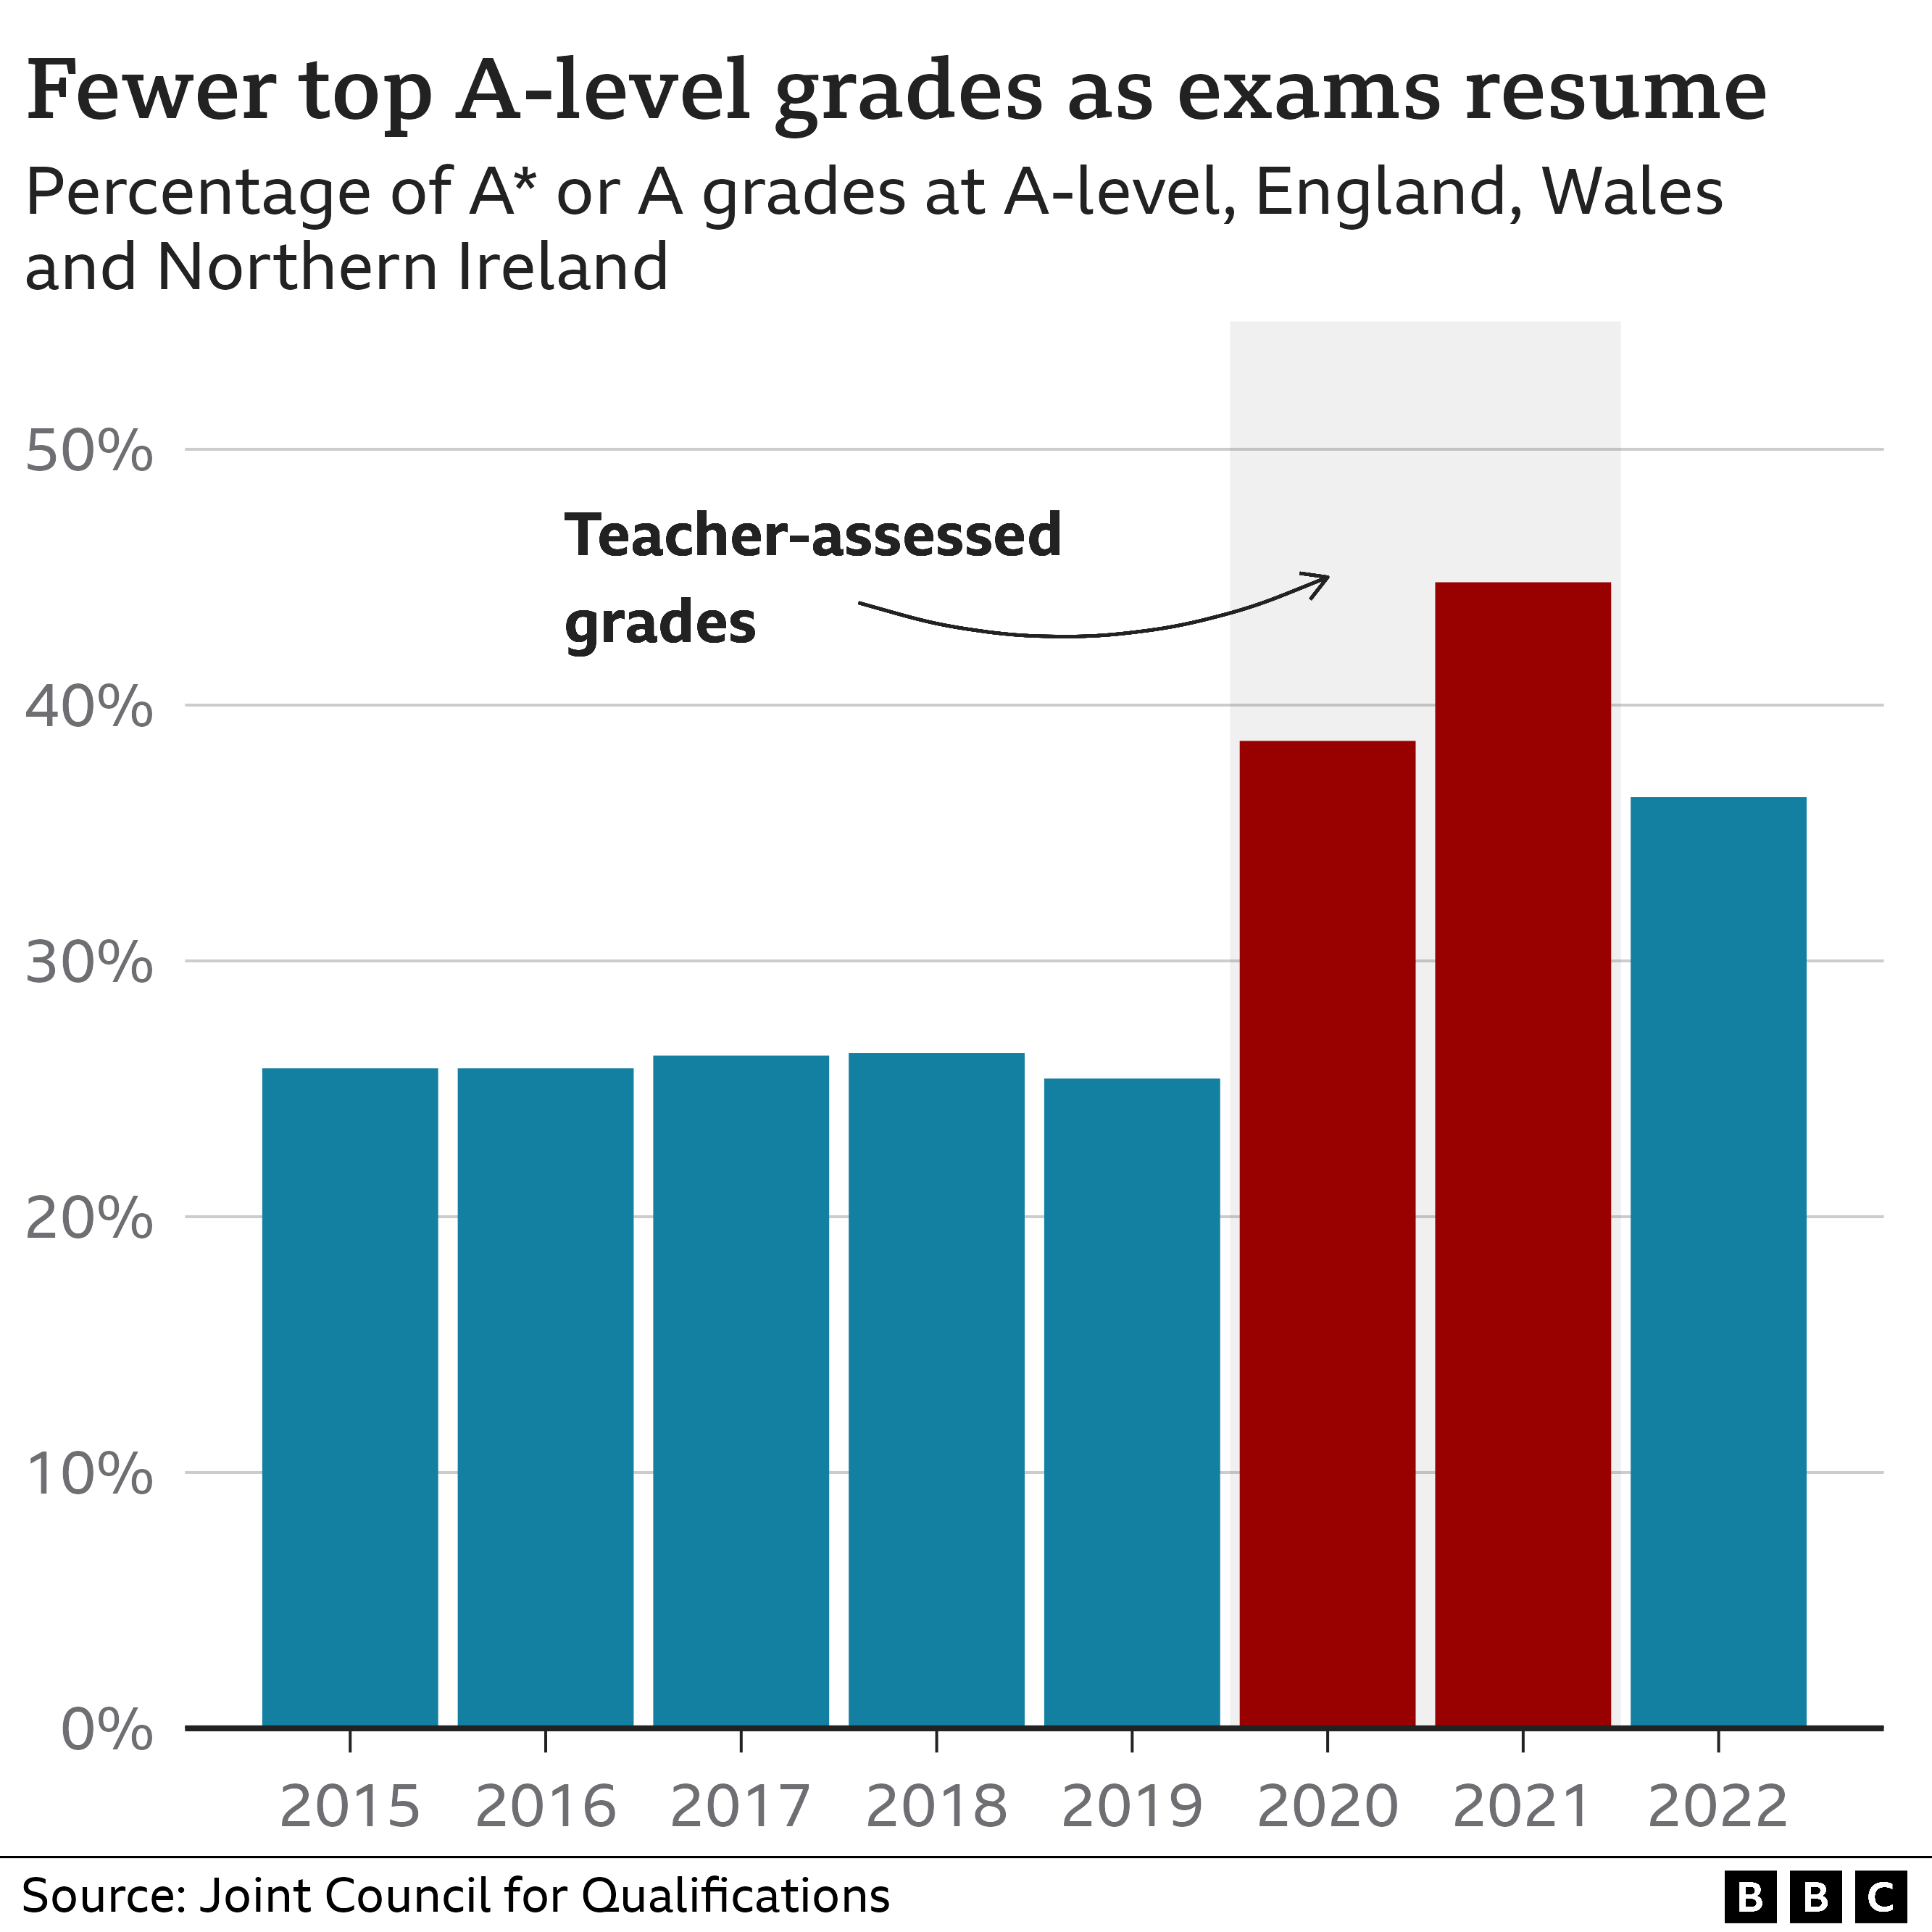 Chart showing there are fewer top A-level grades after exams resumed